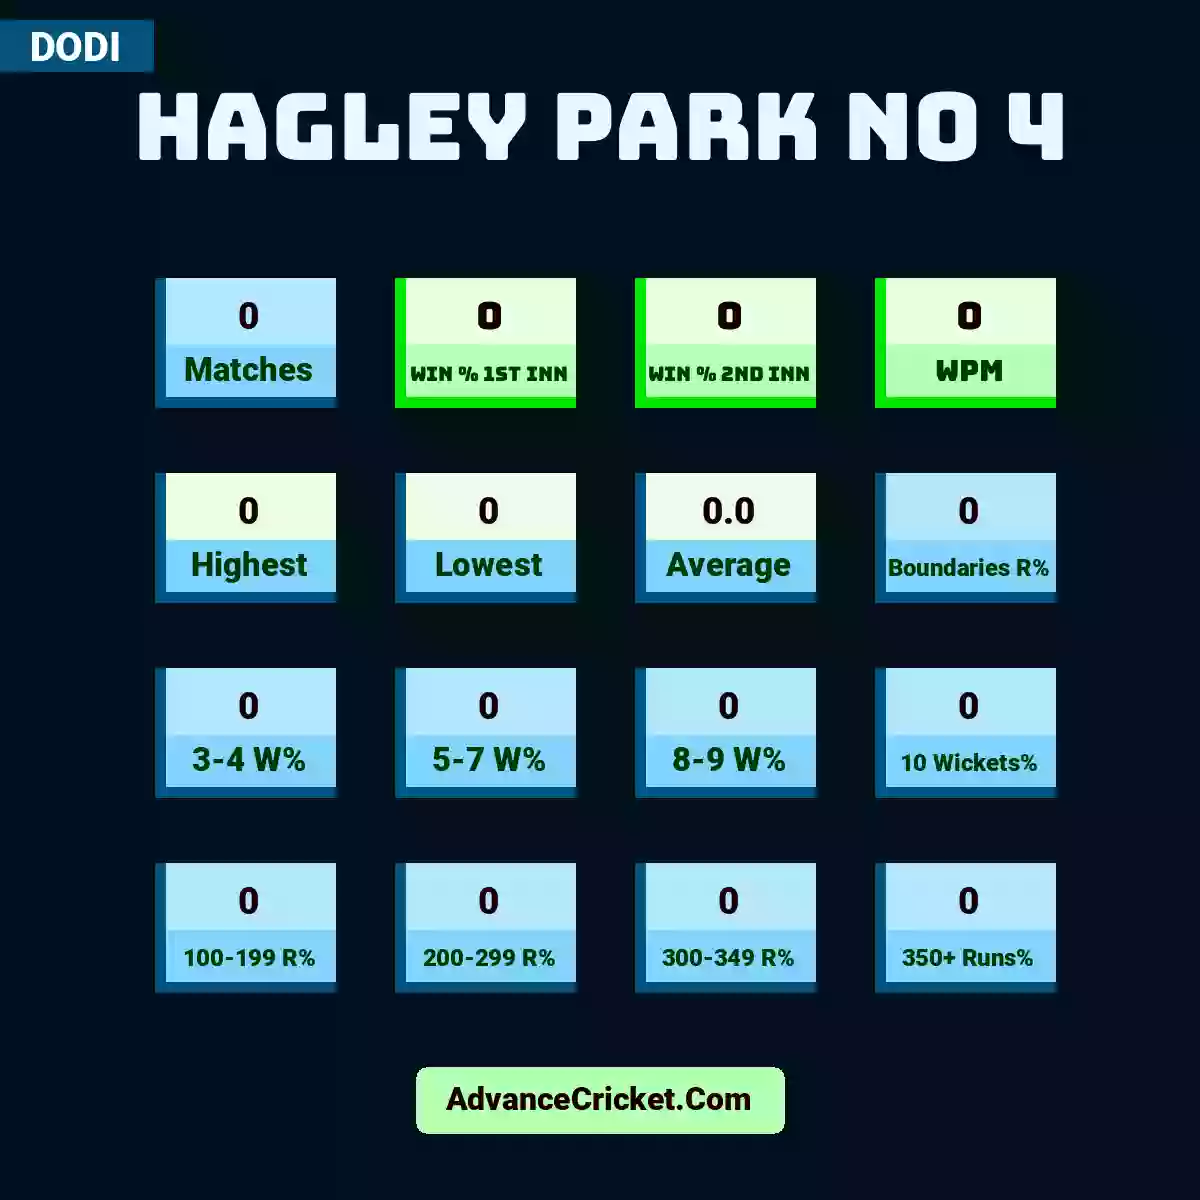 Image showing Hagley Park No 4 with Matches: 0, Win % 1st Inn: 0, Win % 2nd Inn: 0, WPM: 0, Highest: 0, Lowest: 0, Average: 0.0, Boundaries R%: 0, 3-4 W%: 0, 5-7 W%: 0, 8-9 W%: 0, 10 Wickets%: 0, 100-199 R%: 0, 200-299 R%: 0, 300-349 R%: 0, 350+ Runs%: 0.